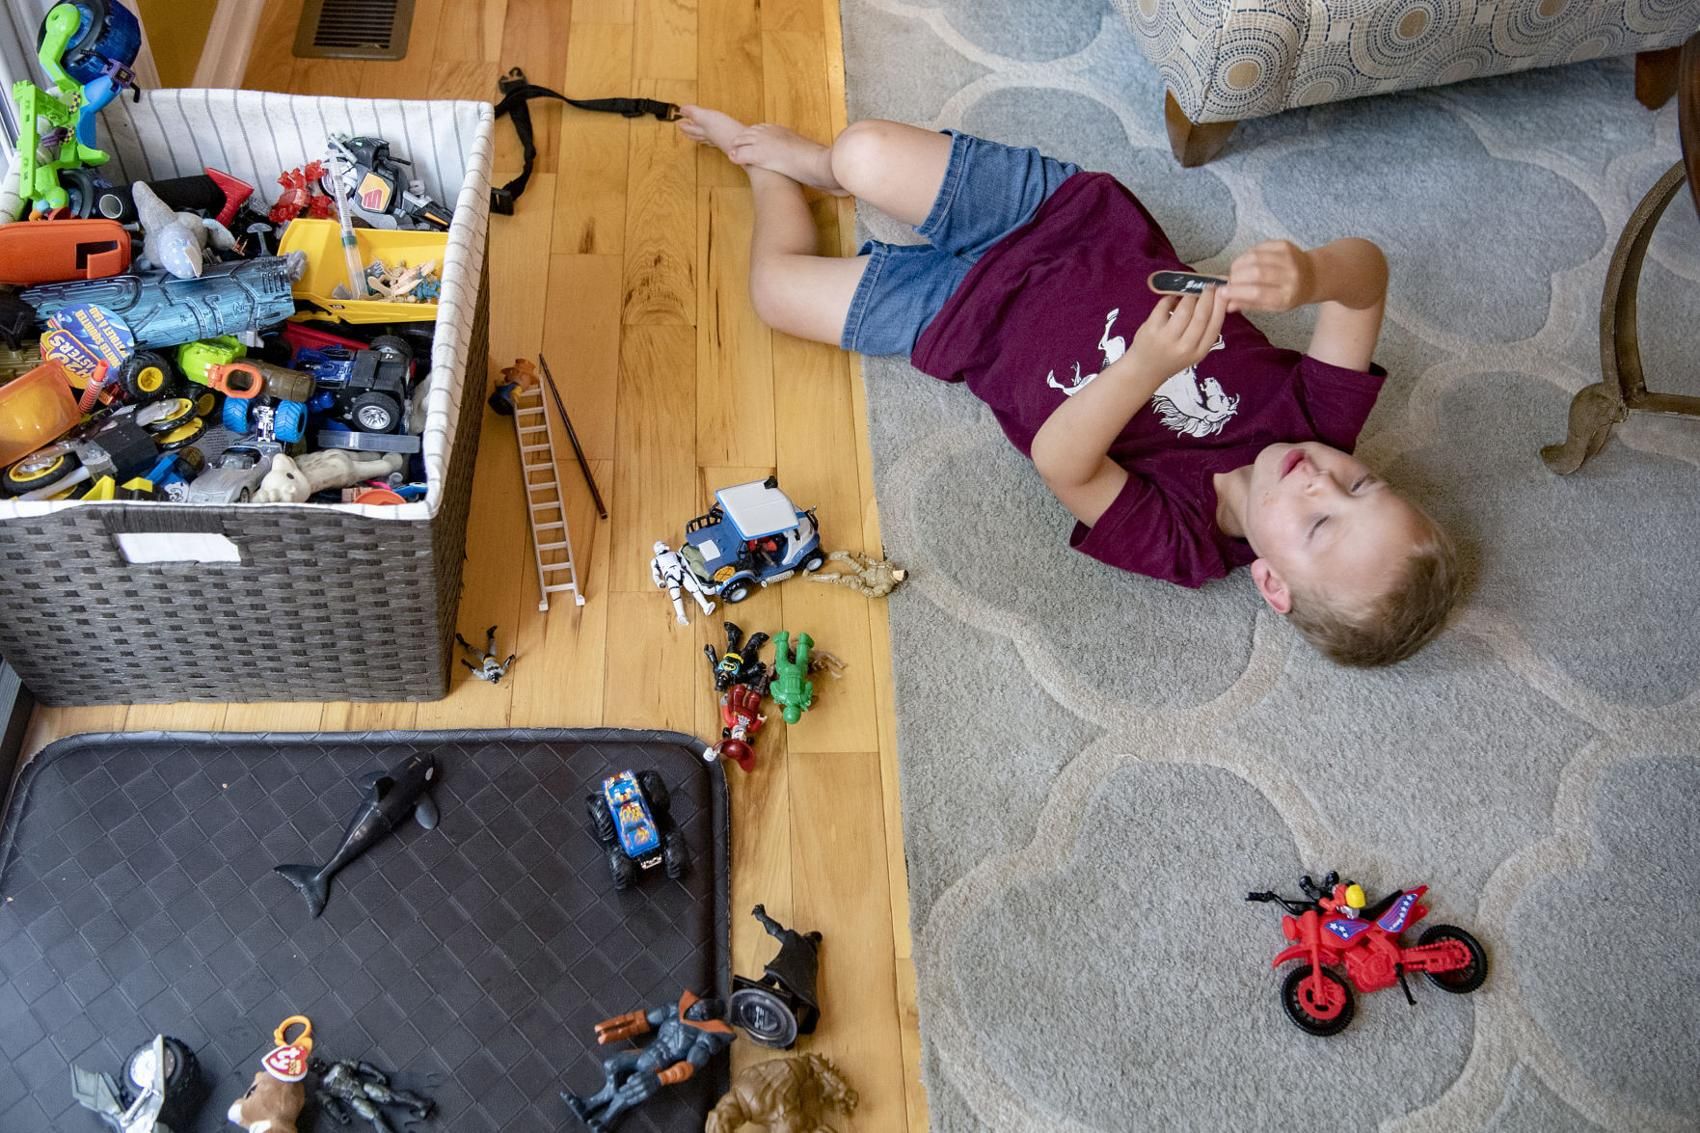 Elias Camacho, 4, plays with toys in the living room of his home in Swannanoa on June 30, 2020. Elias recently had to switch child care centers after the one he was attending closed due to low enrollment after the COVID-19 pandemic. Image by Angeli Wright/Asheville Citizen Times/North Carolina News Collaborative. United States, 2020.

